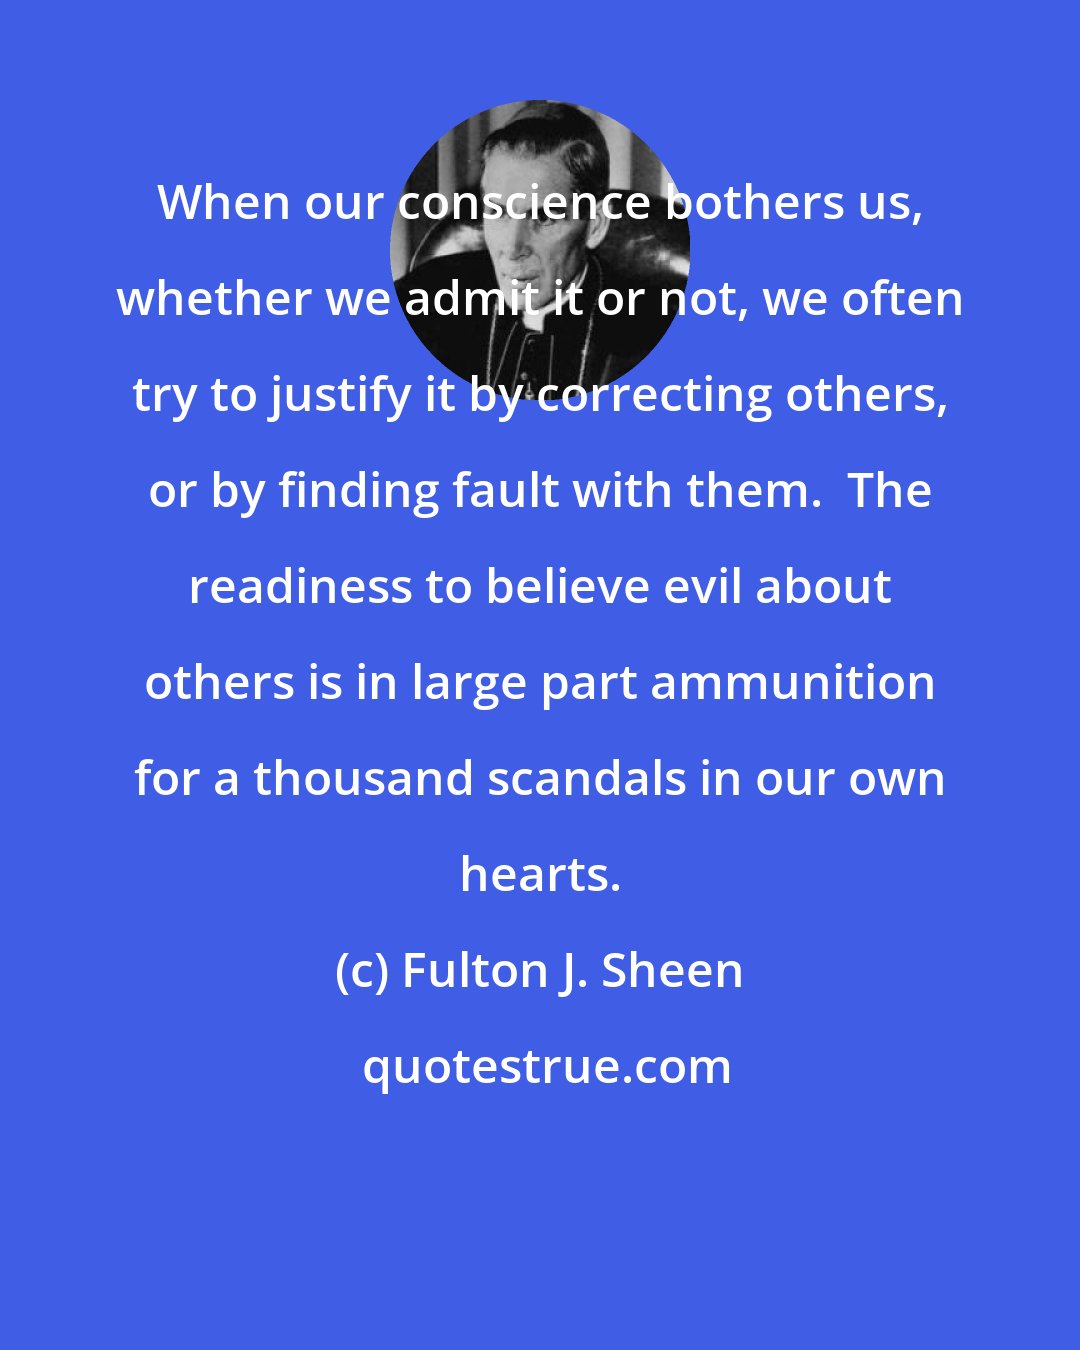 Fulton J. Sheen: When our conscience bothers us, whether we admit it or not, we often try to justify it by correcting others, or by finding fault with them.  The readiness to believe evil about others is in large part ammunition for a thousand scandals in our own hearts.